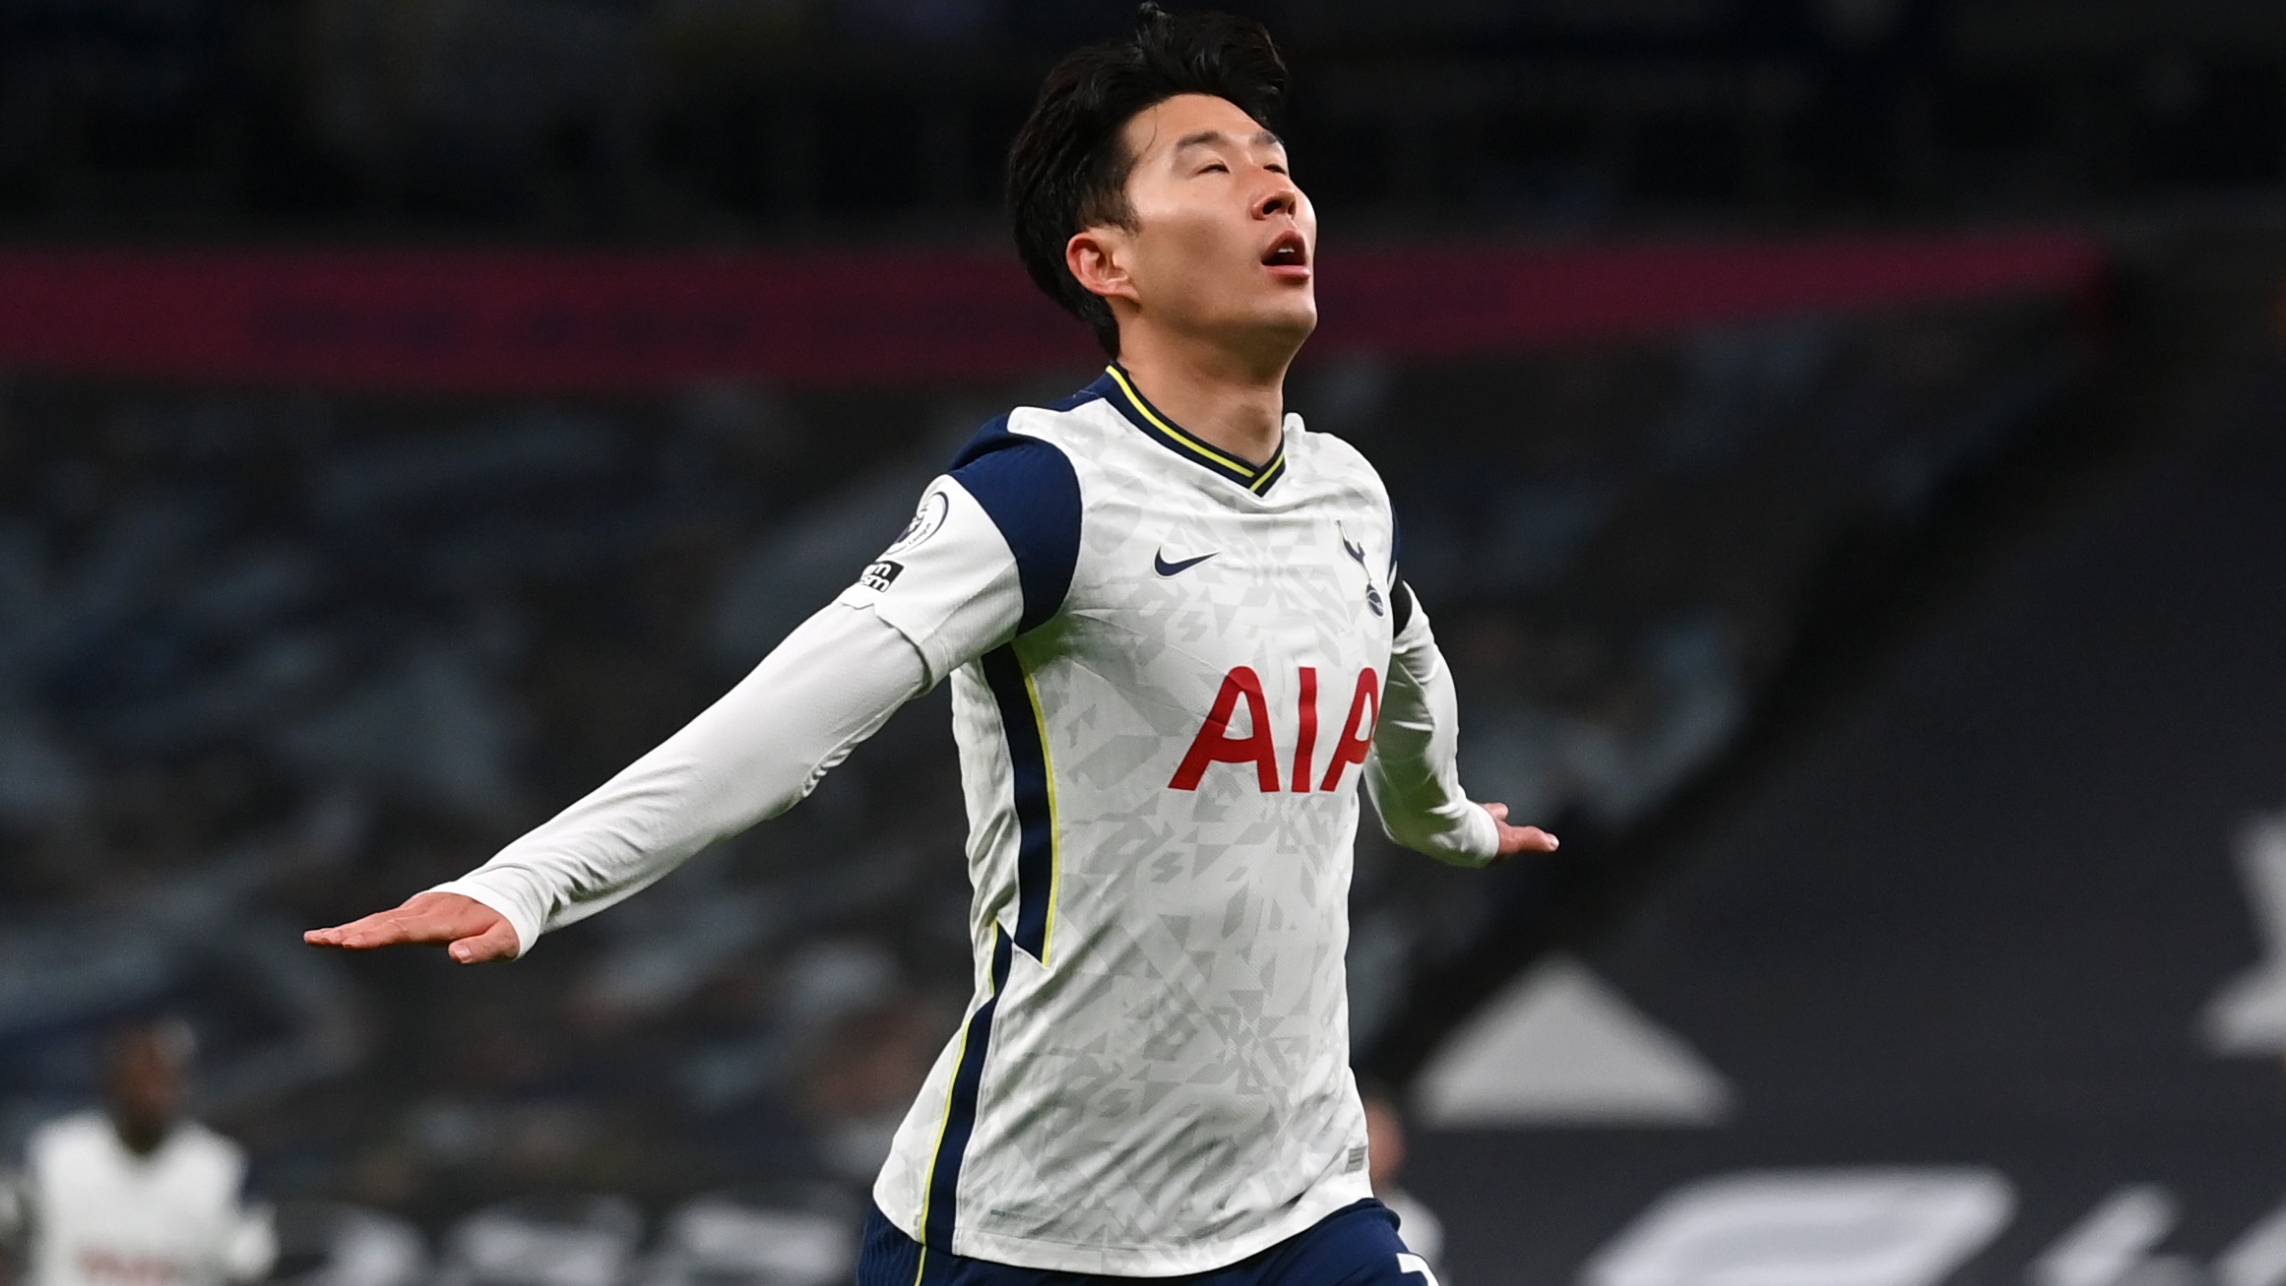 Tottenham star Son signs new four-year contract with Premier League club